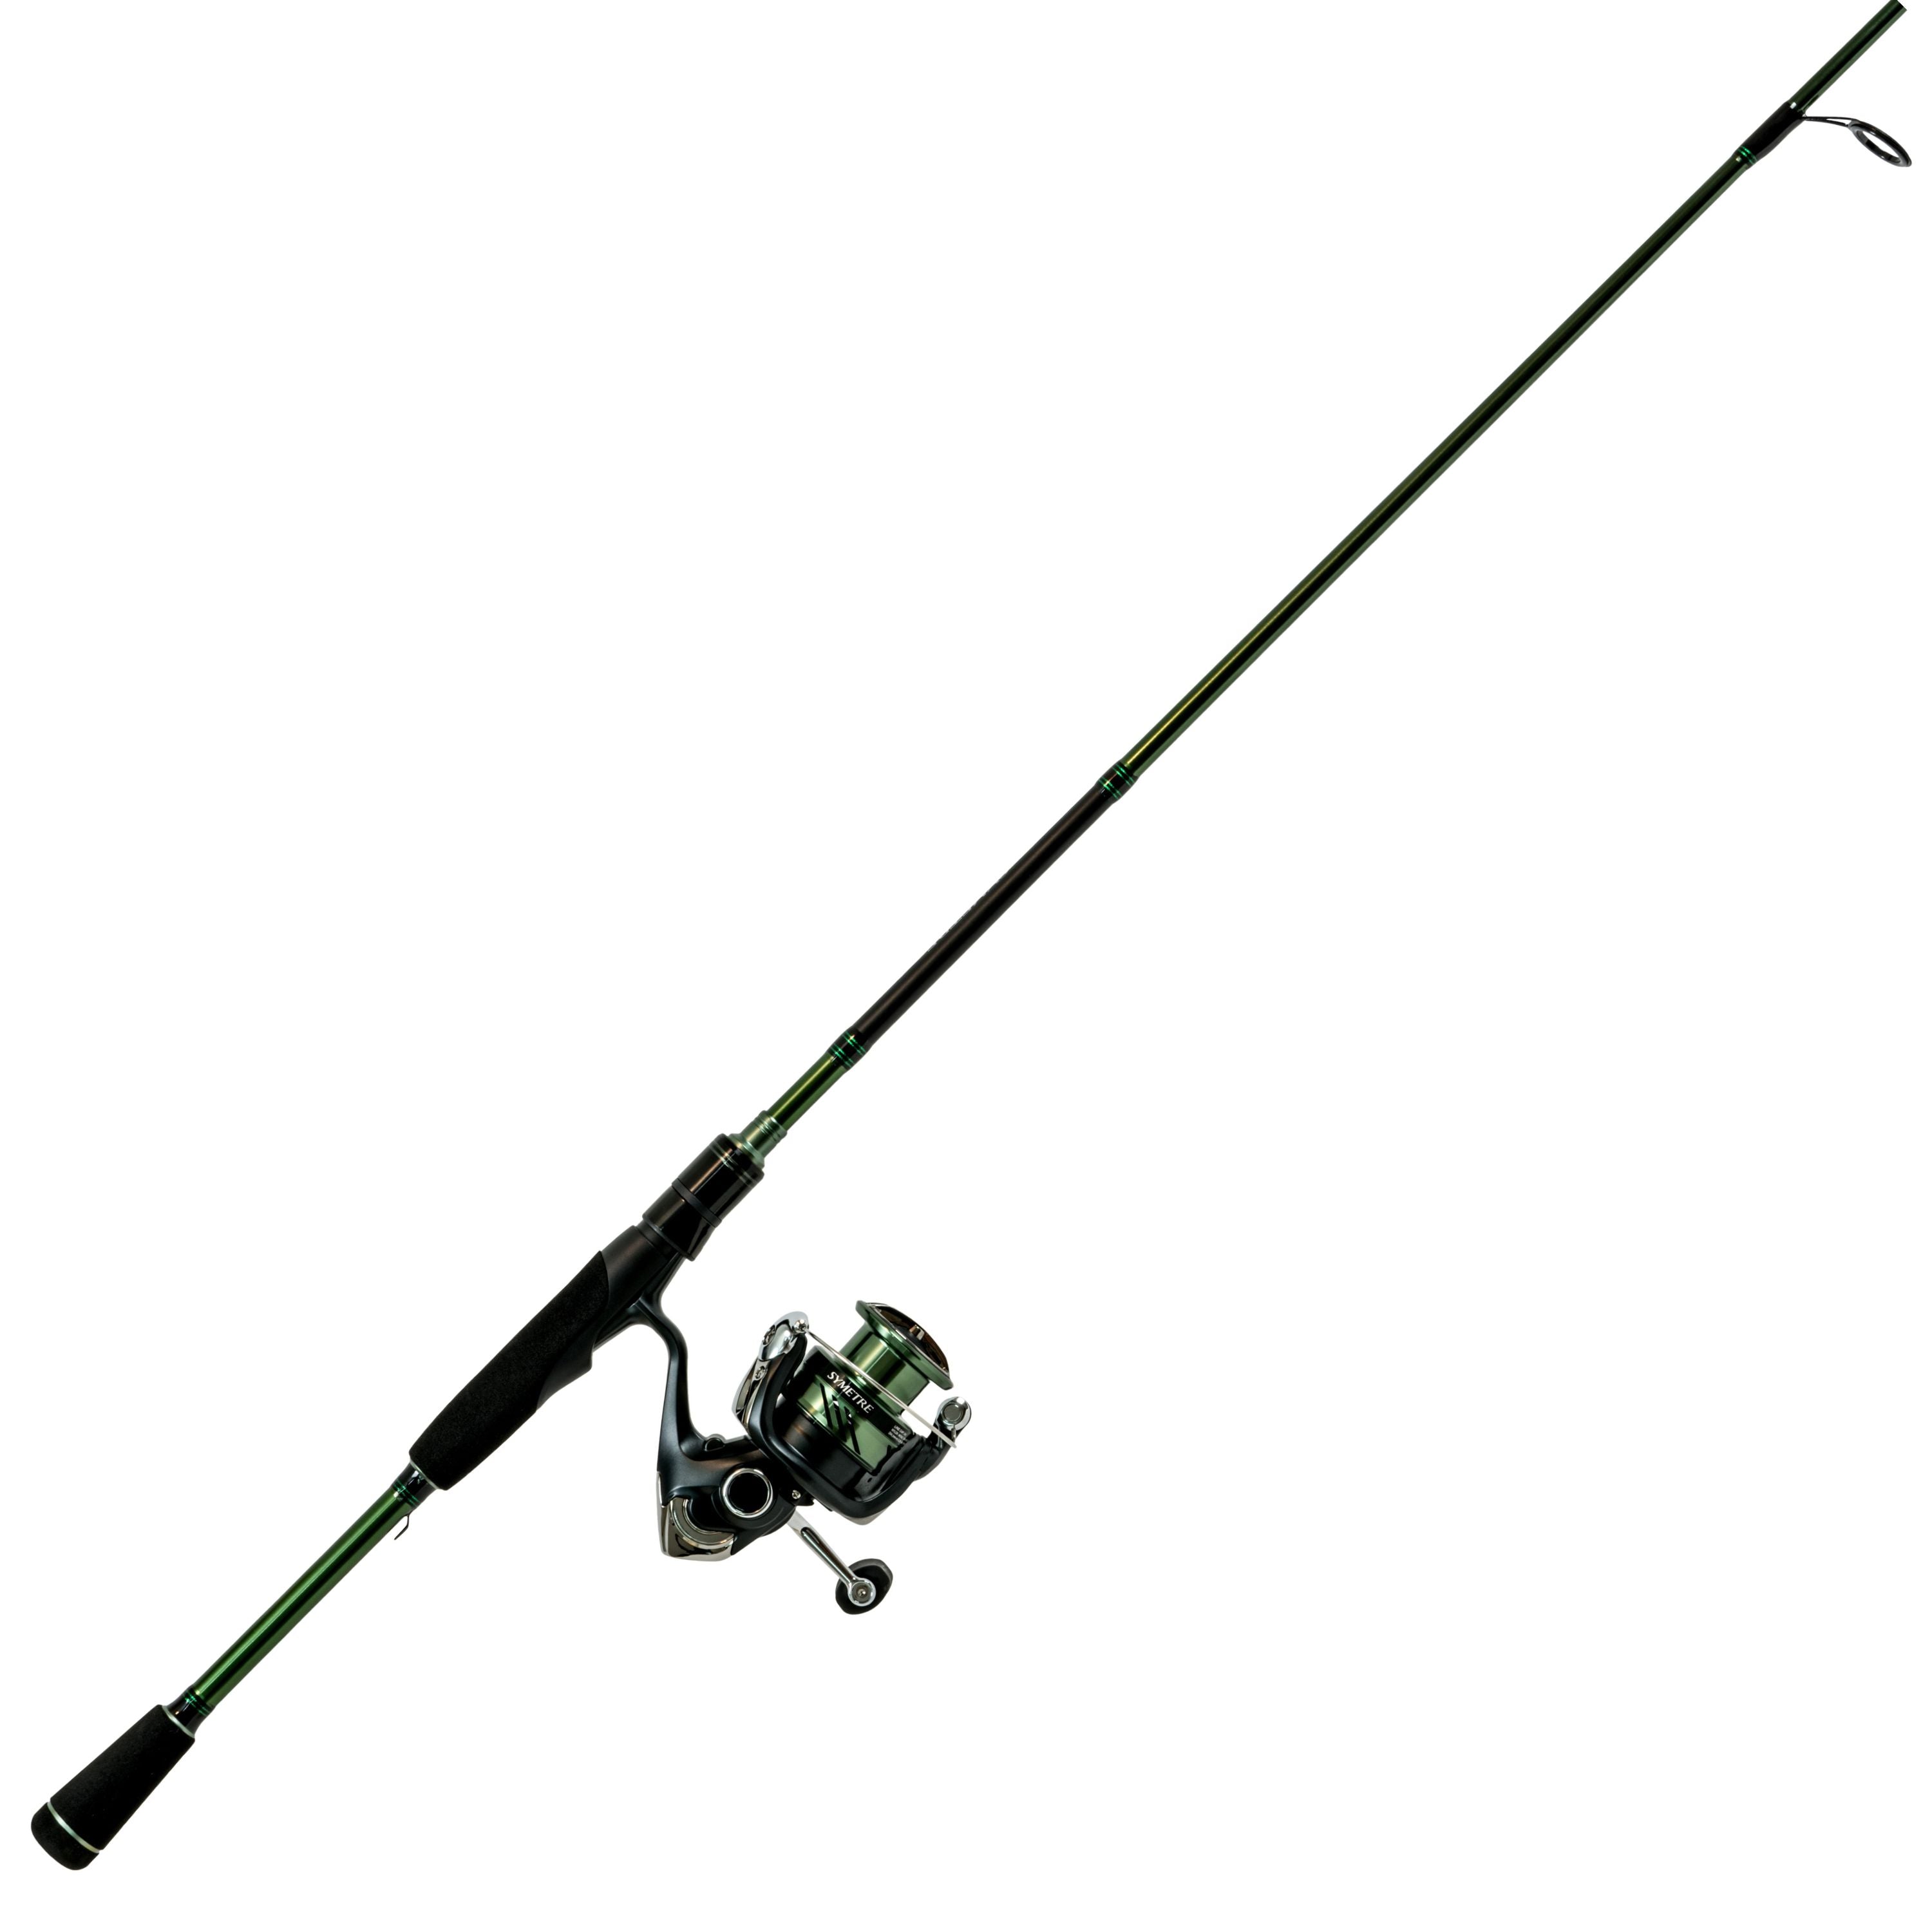 "Symetre" Spinning combo 2500 reel